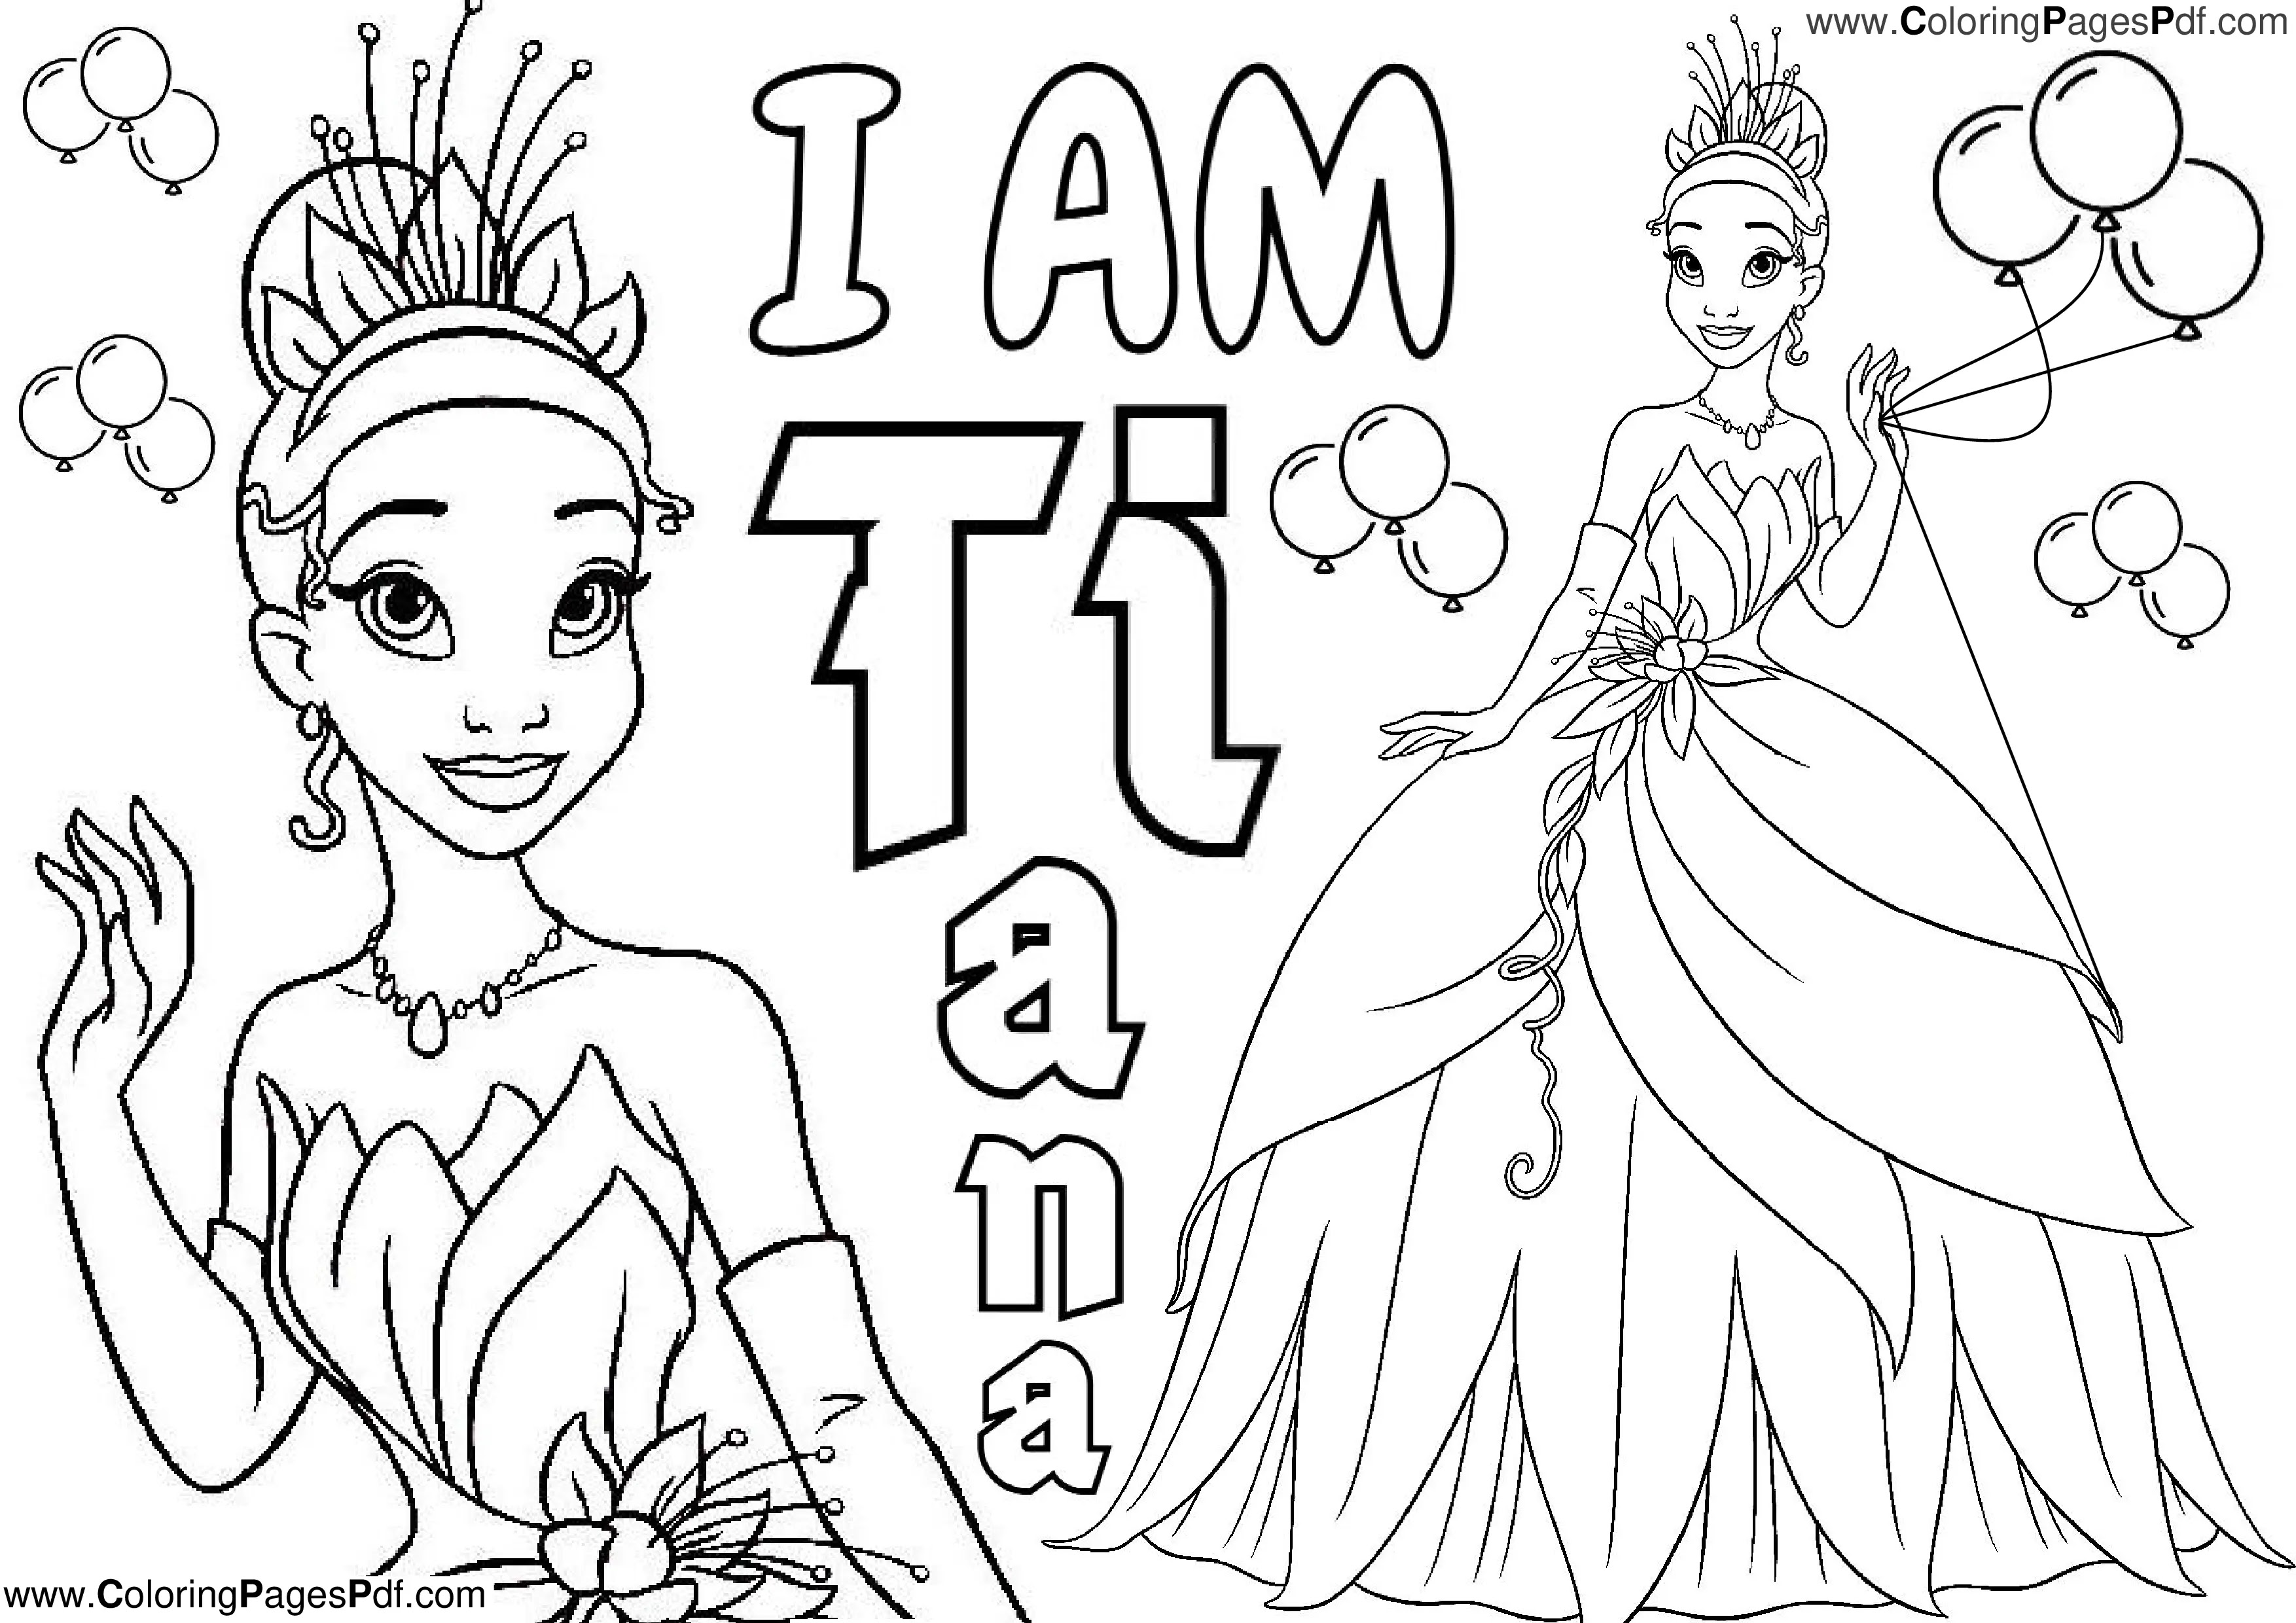 rapunzel coloring pages free,free printable ariel coloring pages,belle coloring pages,ariel coloring pages free,ariel coloring pages,ariel colouring,belle coloring,elsa coloring pages,elsa coloring,elsa and anna coloring pages,elsa coloring pages free,elsa printable coloring pages,elsa colouring book